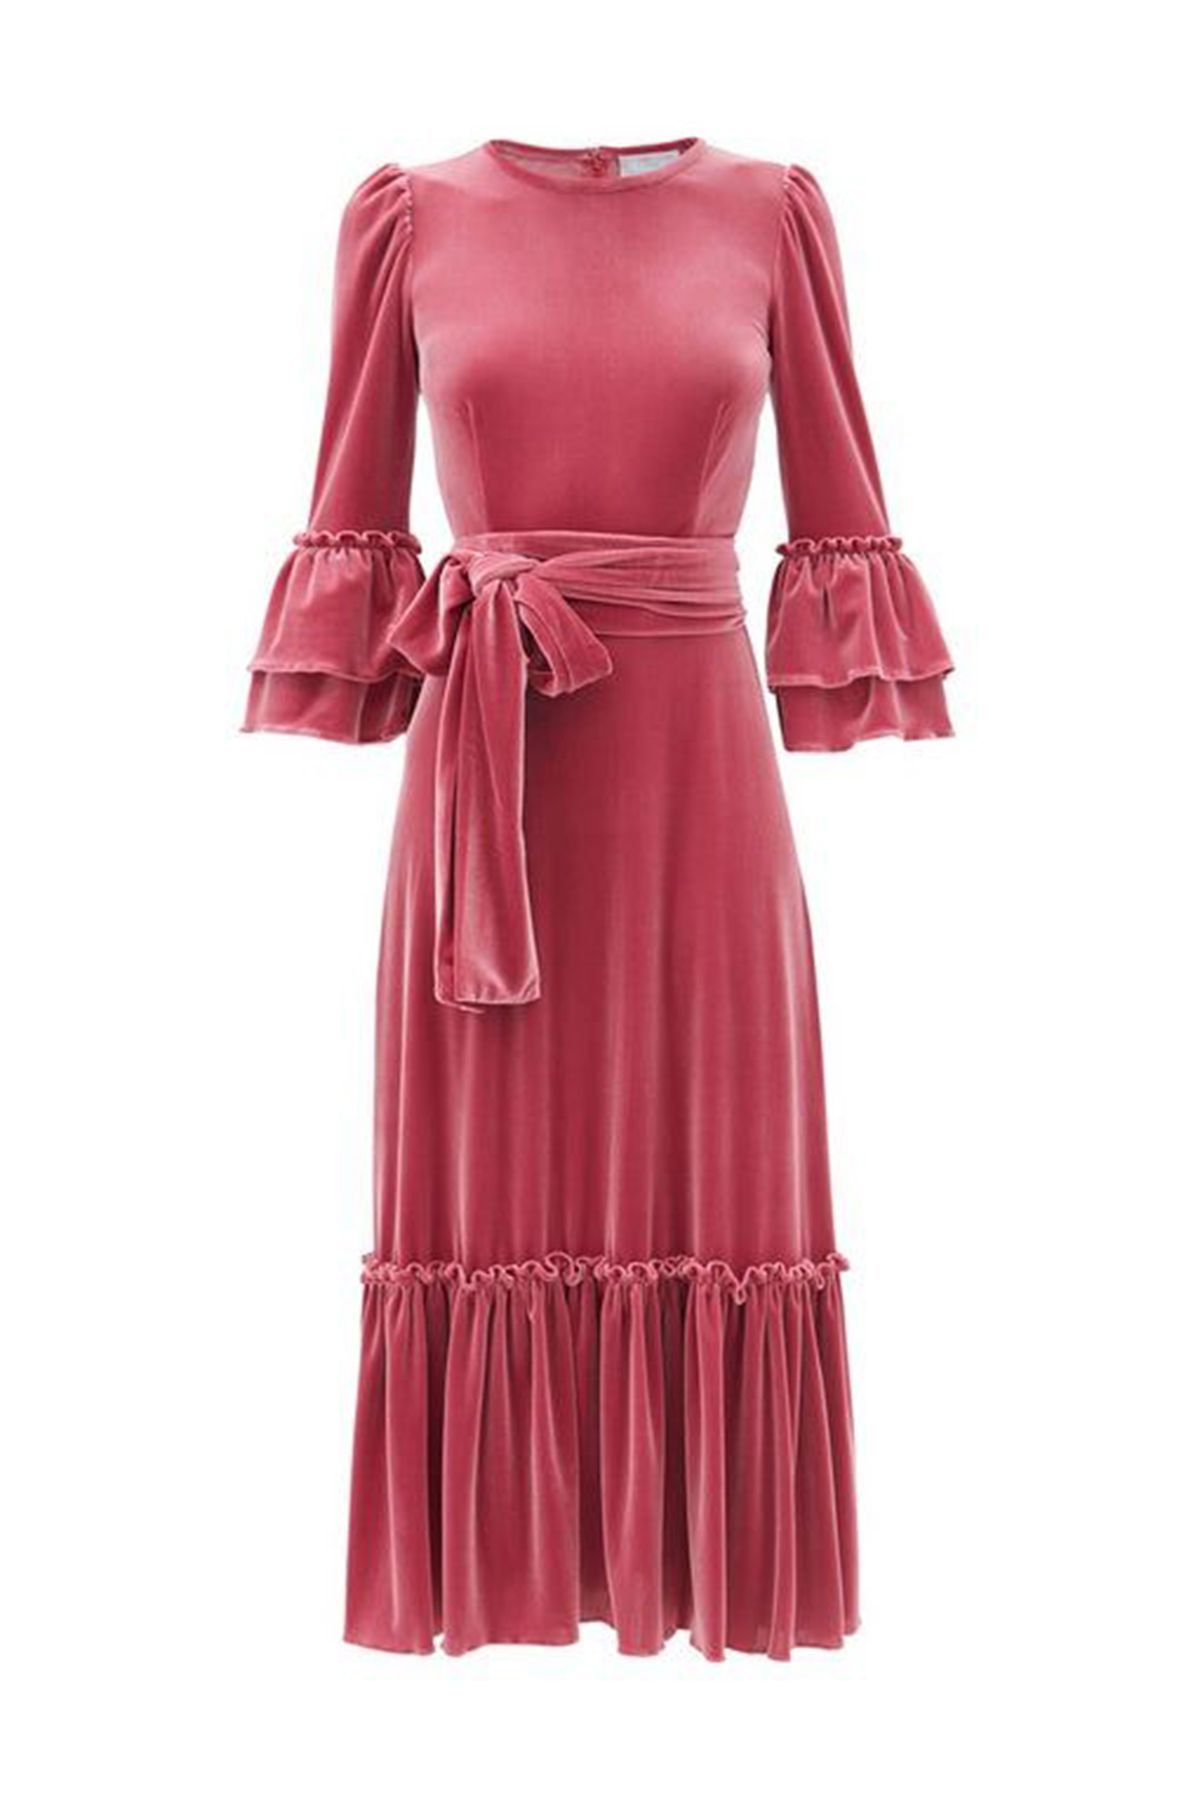 18 Stylish Mother of the Groom Dresses for Fall Weddings 2021 ...